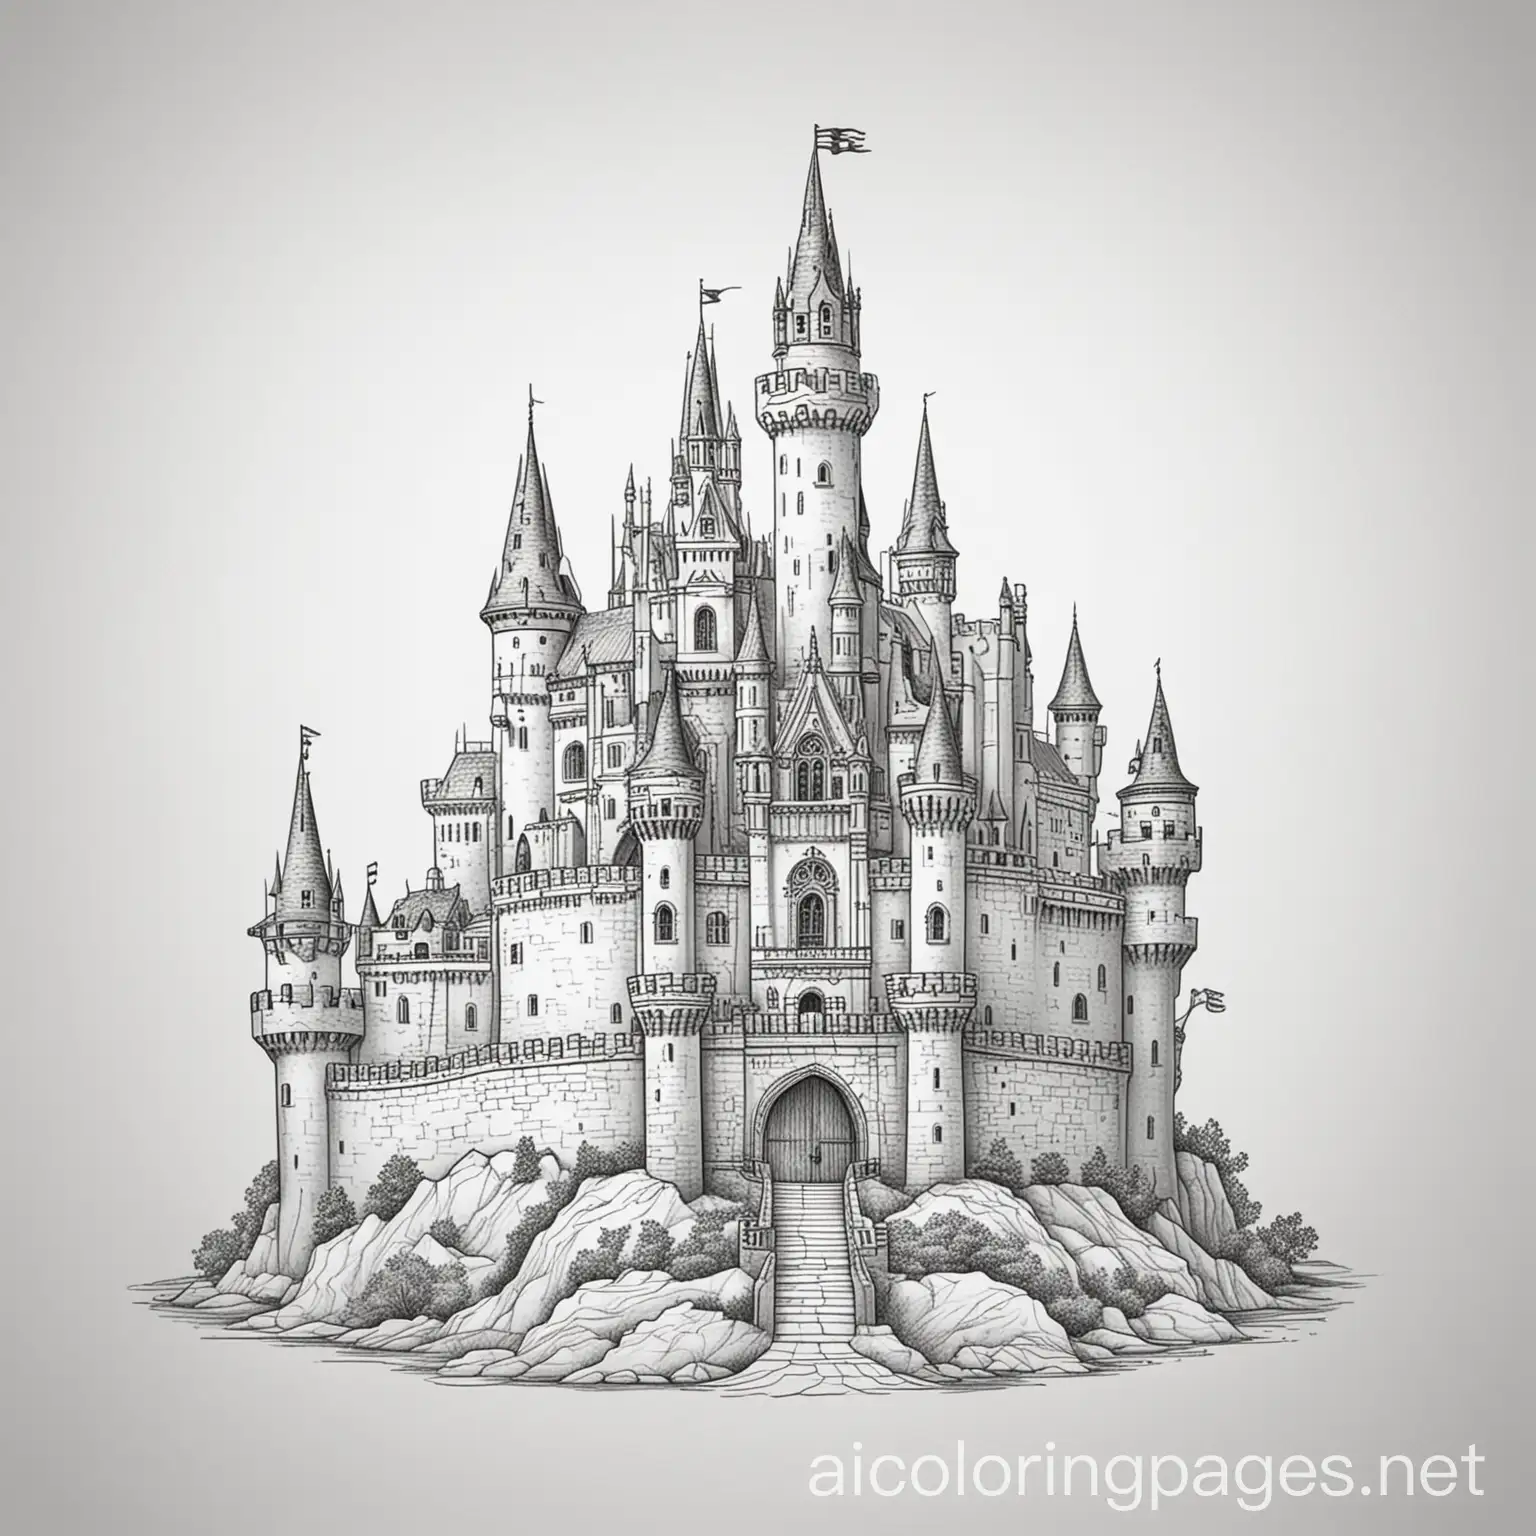 castle, Coloring Page, black and white, line art, white background, Simplicity, Ample White Space. The background of the coloring page is plain white to make it easy for young children to color within the lines. The outlines of all the subjects are easy to distinguish, making it simple for kids to color without too much difficulty